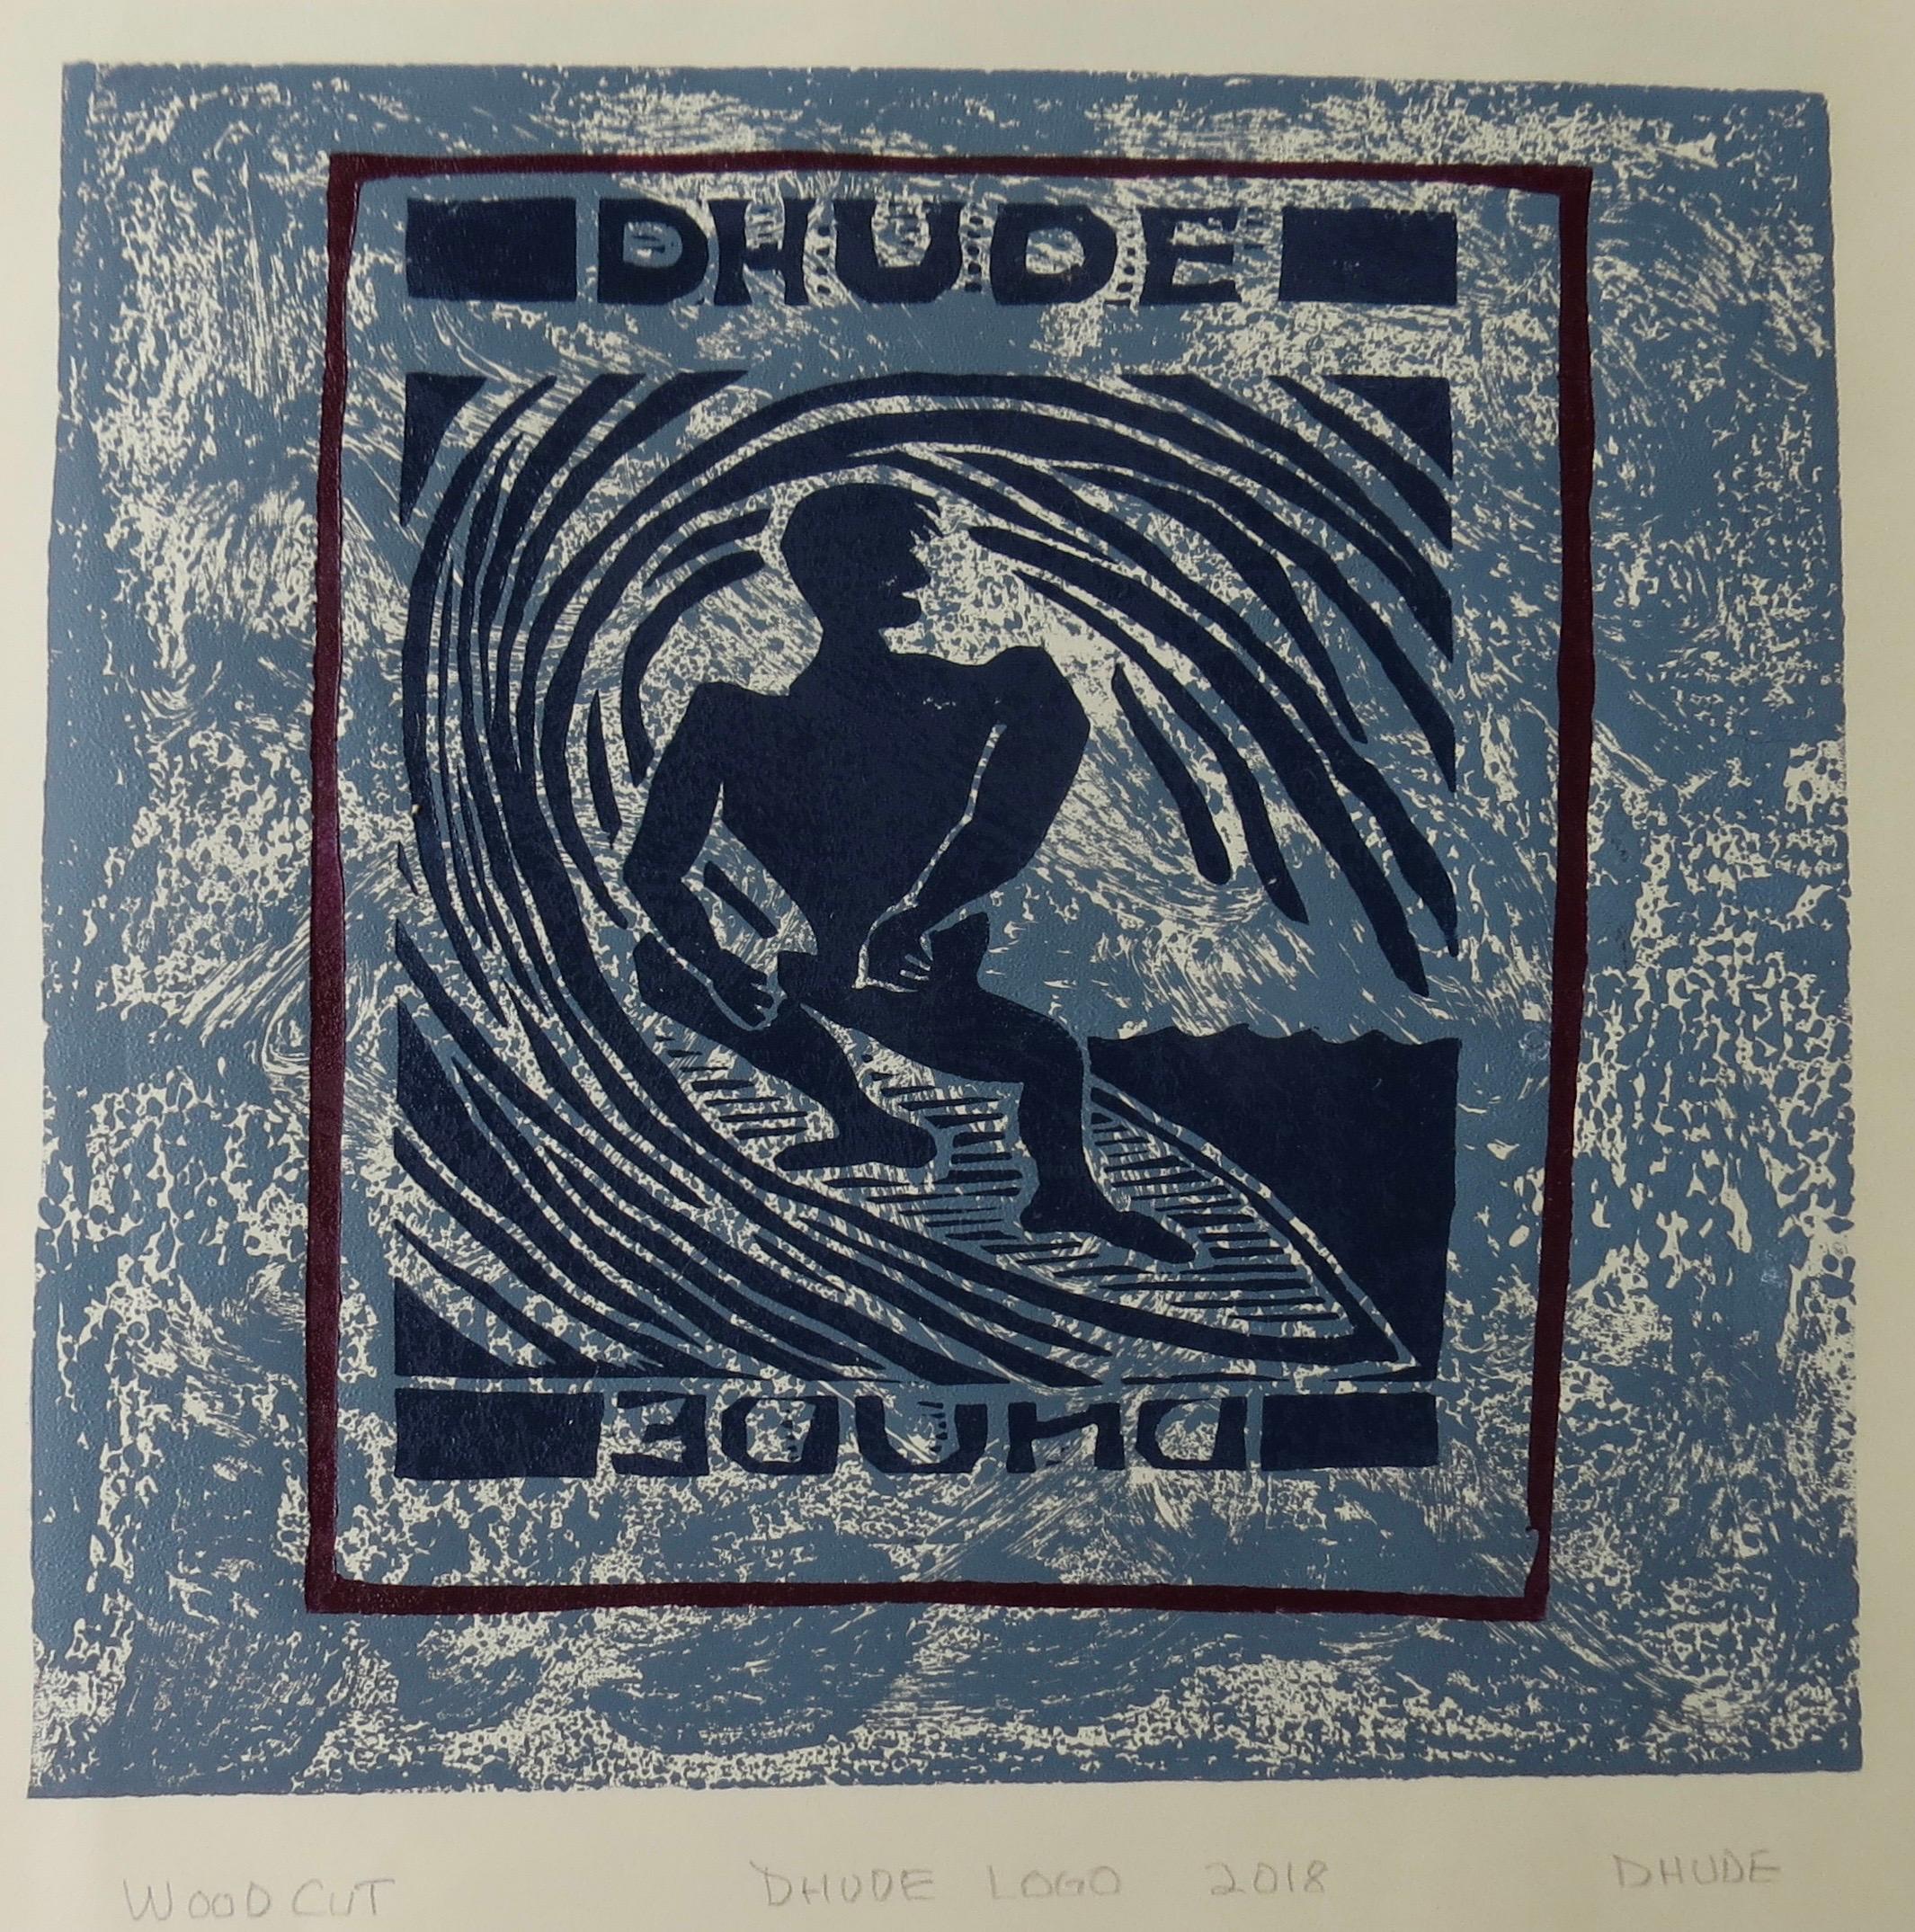 Woodcut print of my surfing logo.  One of my first images in woodcut from 1989 titled; " Dr Zongo shoots the tube." Stlyish surf stance,dont you think?

Dhude(  Surfer) - Figurative Print - Woodcut Print By Marc Zimmerman

This masterpiece is